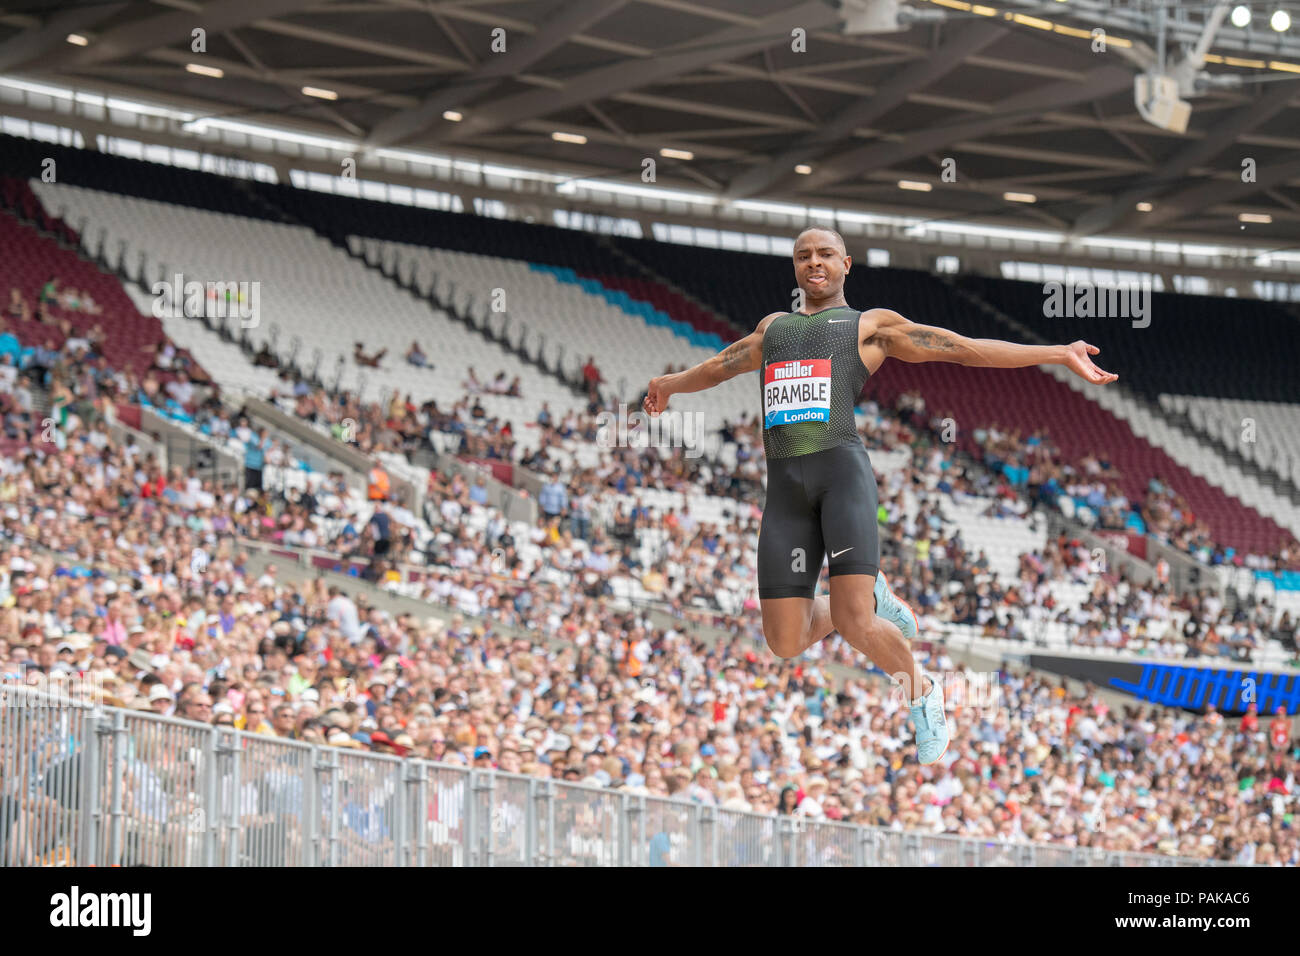 London, UK. 22nd July 2018. Dan Bramble competes in the long jump at the Muller Anniversary Games at the London Stadium, London, Great Britiain, on 22 July 2018. Credit: Andrew Peat/Alamy Live News Stock Photo